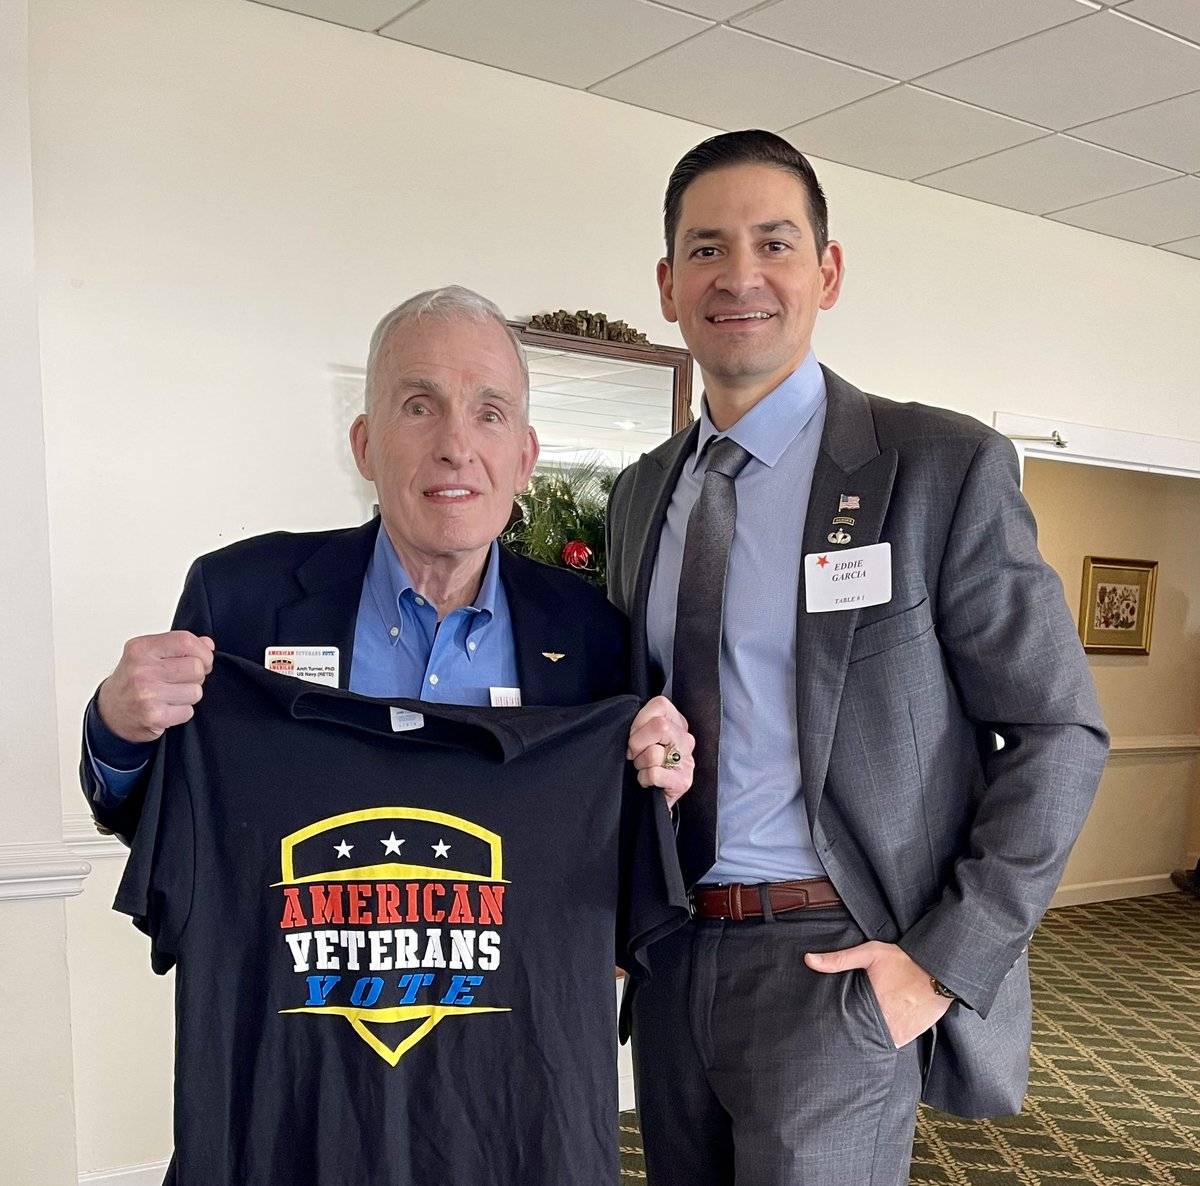 It’s always great to meet veterans who are still serving our nation and our communities like Arch here. #AmericanVeteransVote
#VetsHelpingVets